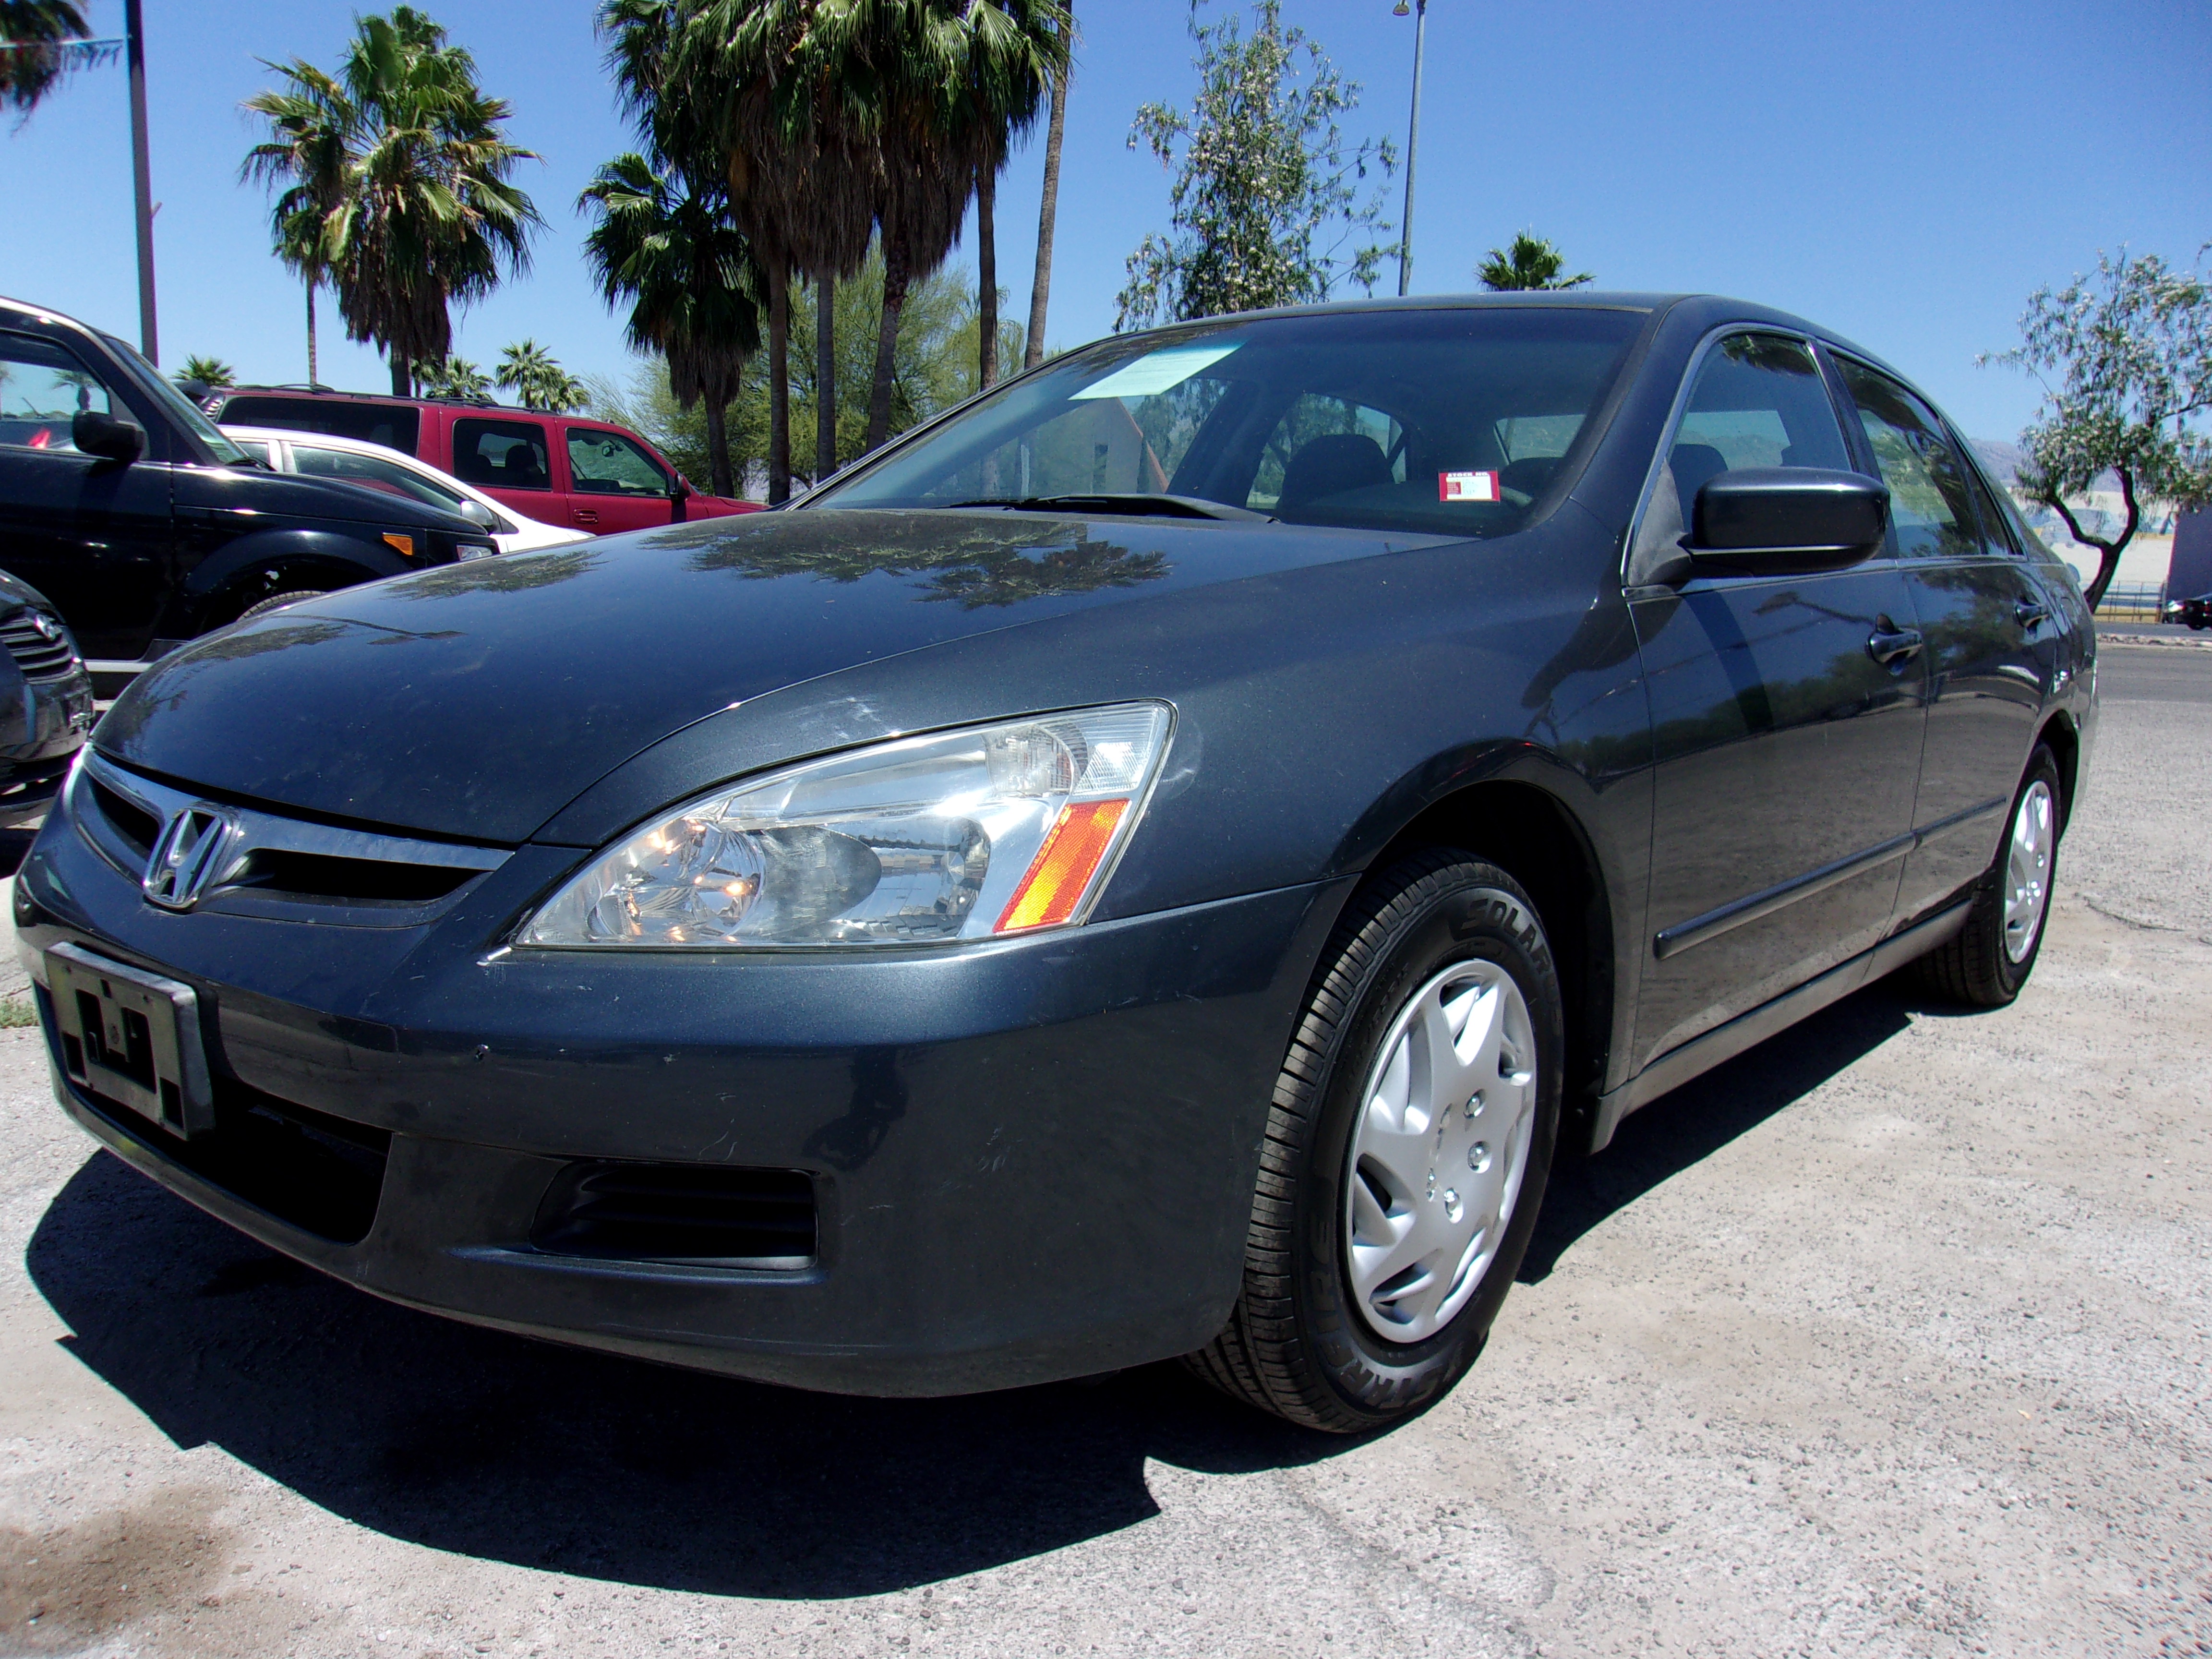 PreOwned 2006 Honda ACCORD 4dr Car in Tucson S6313R